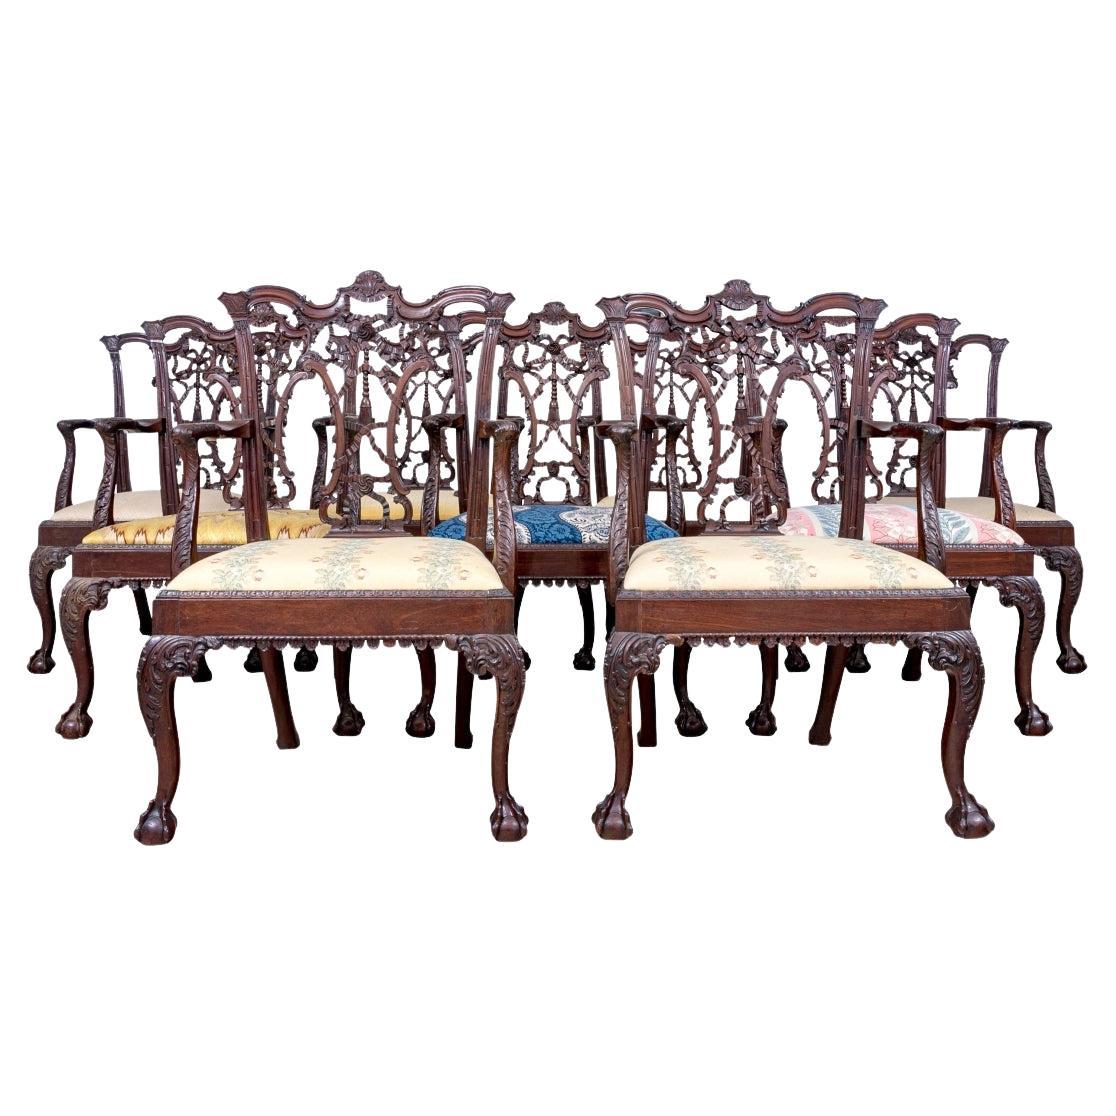 Extraordinary Set Of 8 Antique Georgian Ribbon Back Arm Chairs For Sale